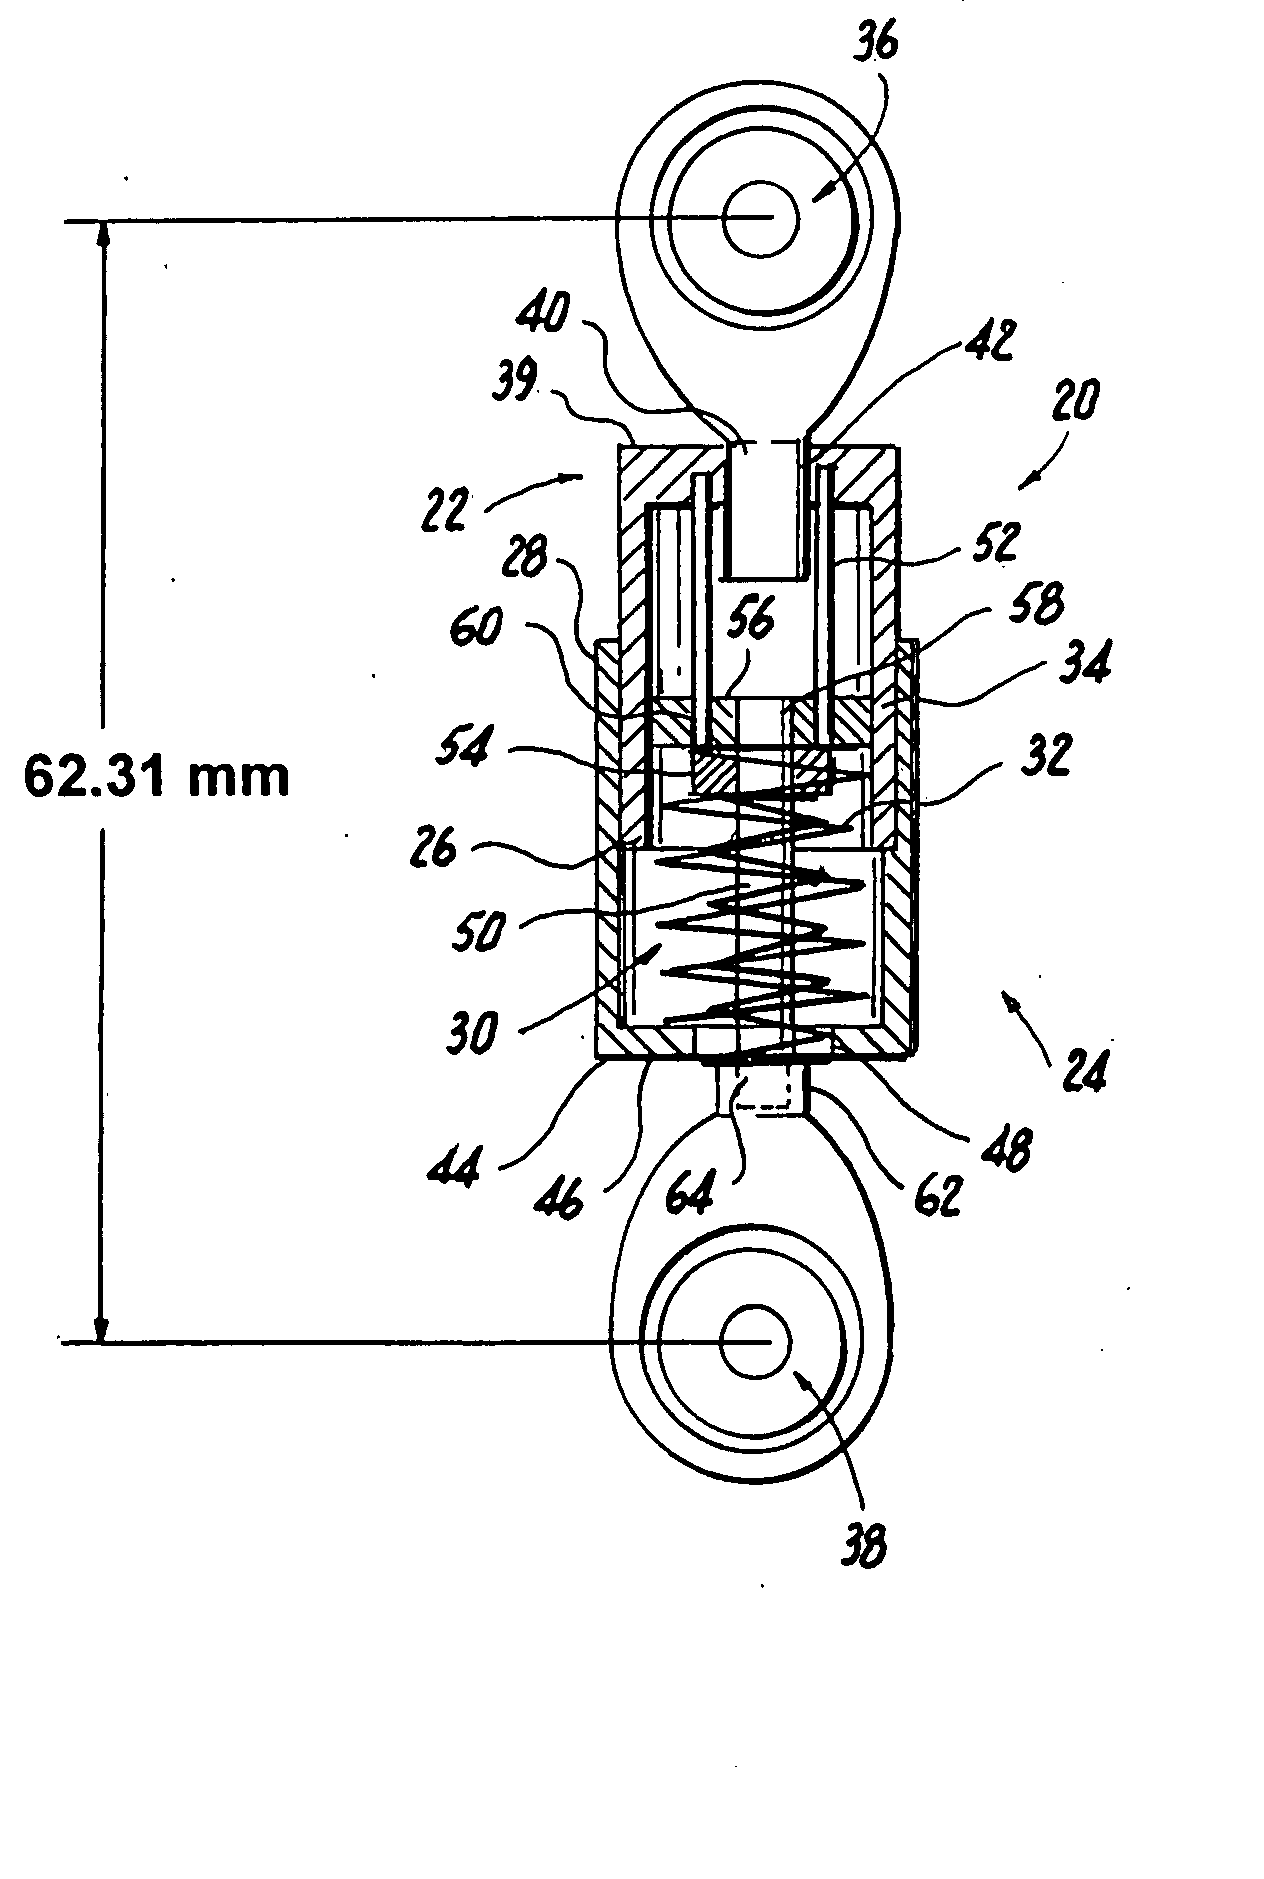 Spine stabilization systems and associated devices, assemblies and methods